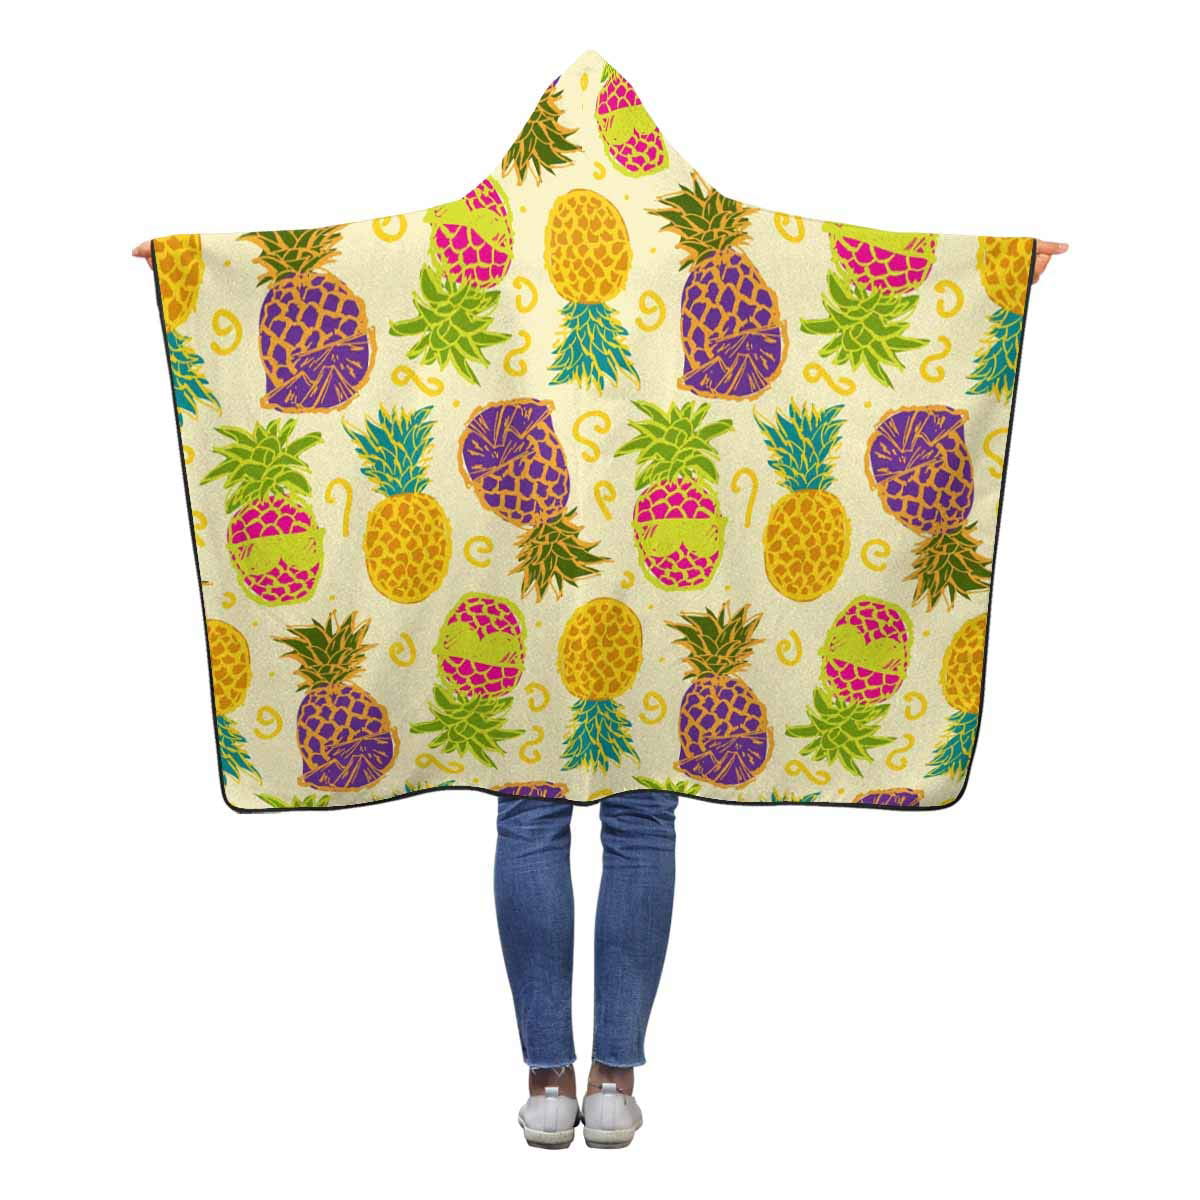 INTERESTPRINT Chickens and Yellow Flowers Pattern Throw Blanket 60 x 50 inches Soft Warm Micro Fleece Blankets with Hood